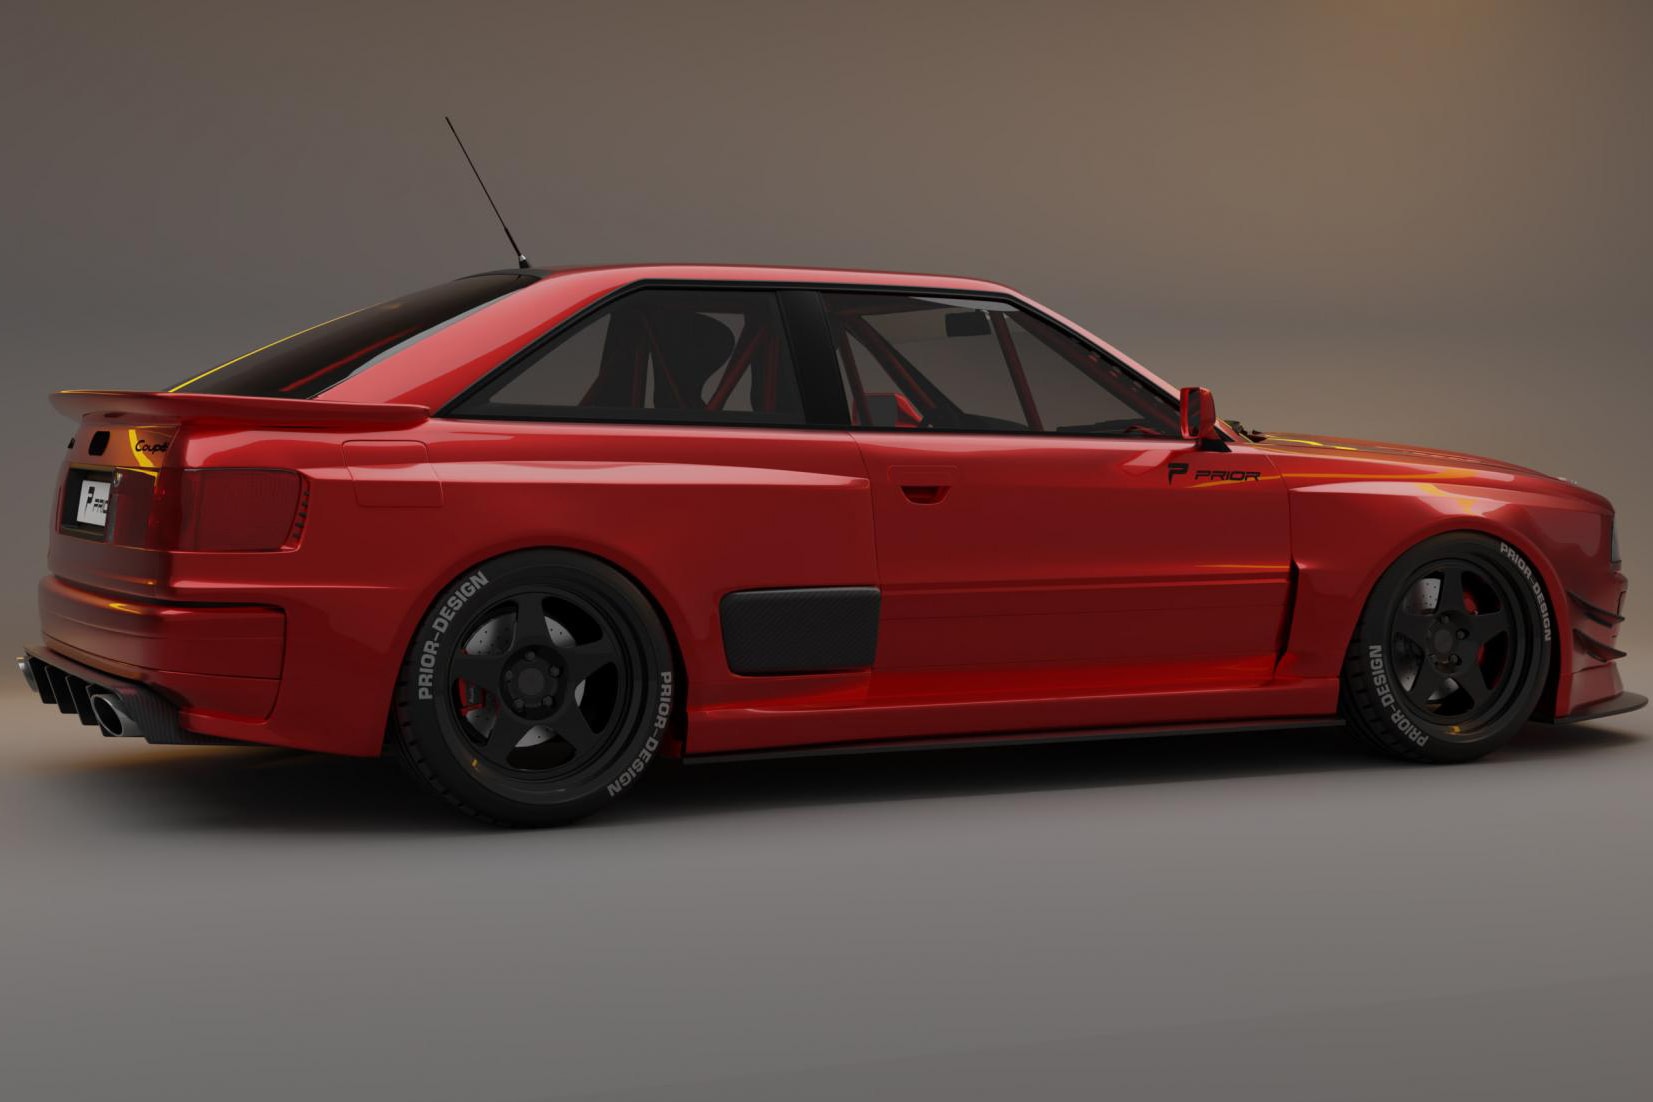 Building the ultimate modified Audi project cars.